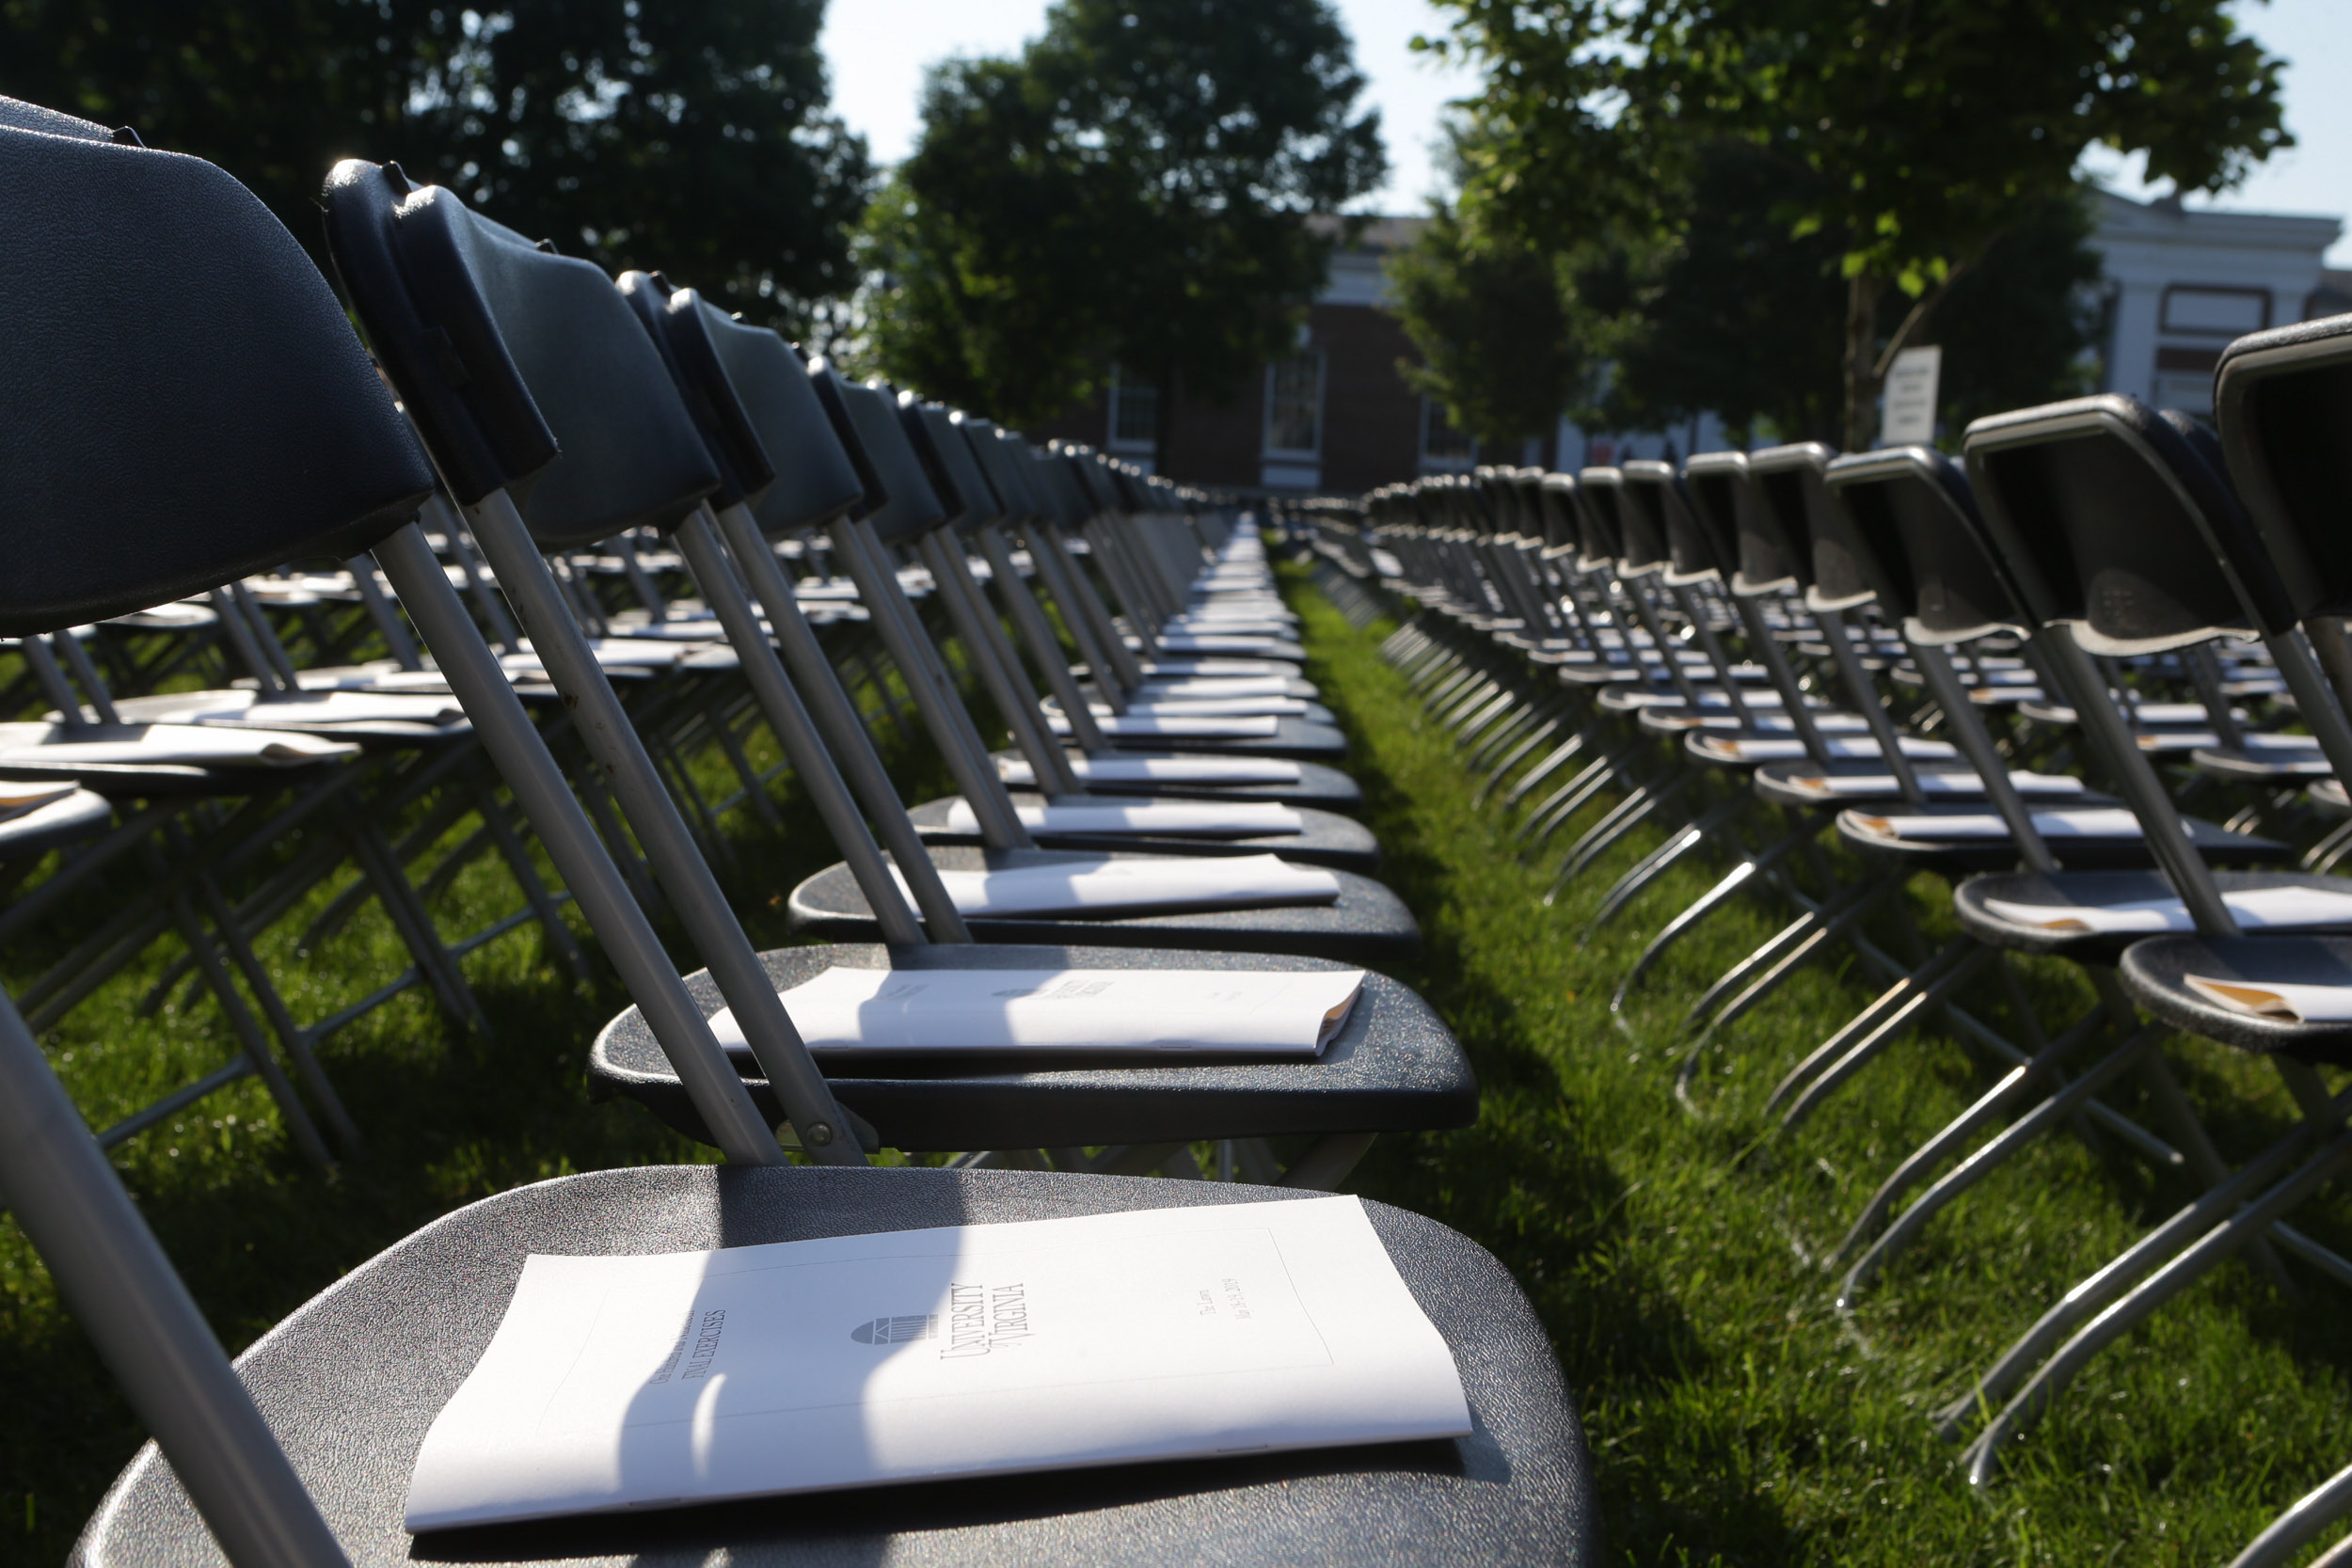 Rows of empty chairs set up on the Lawn for Final Exercises